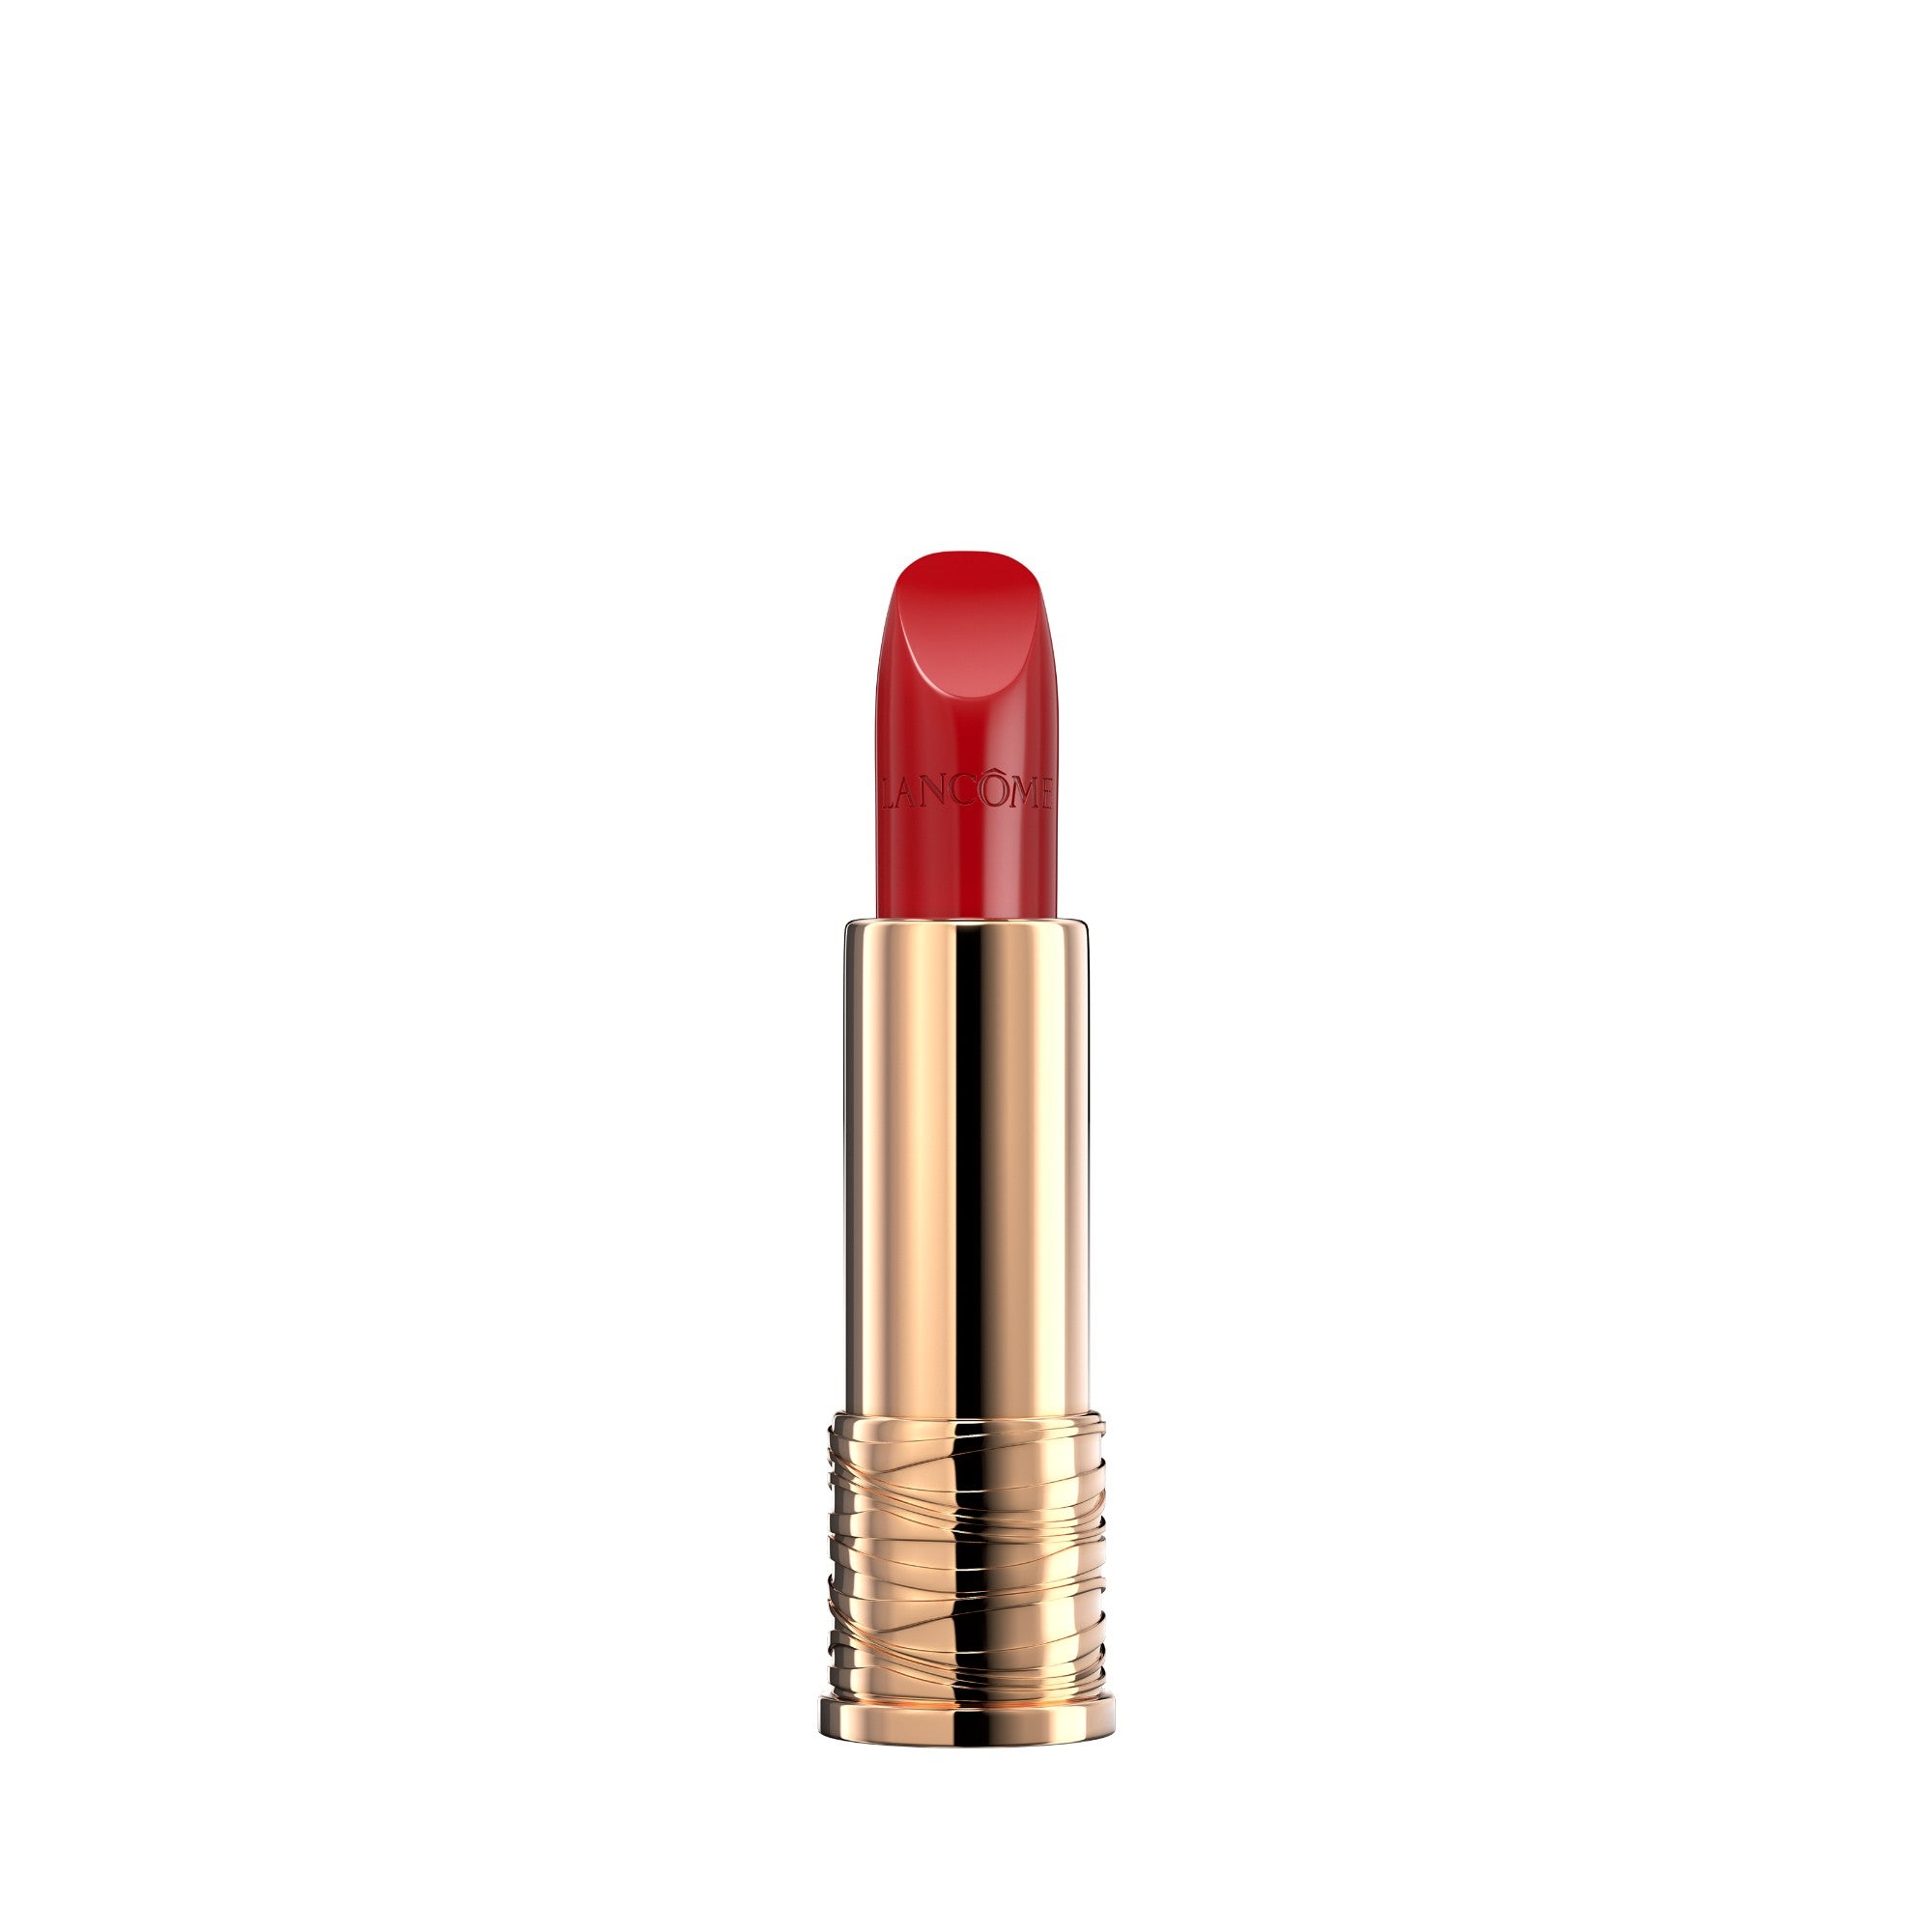 Lancome Absolu Rouge Cream Lipstick Bisou Bisou Only